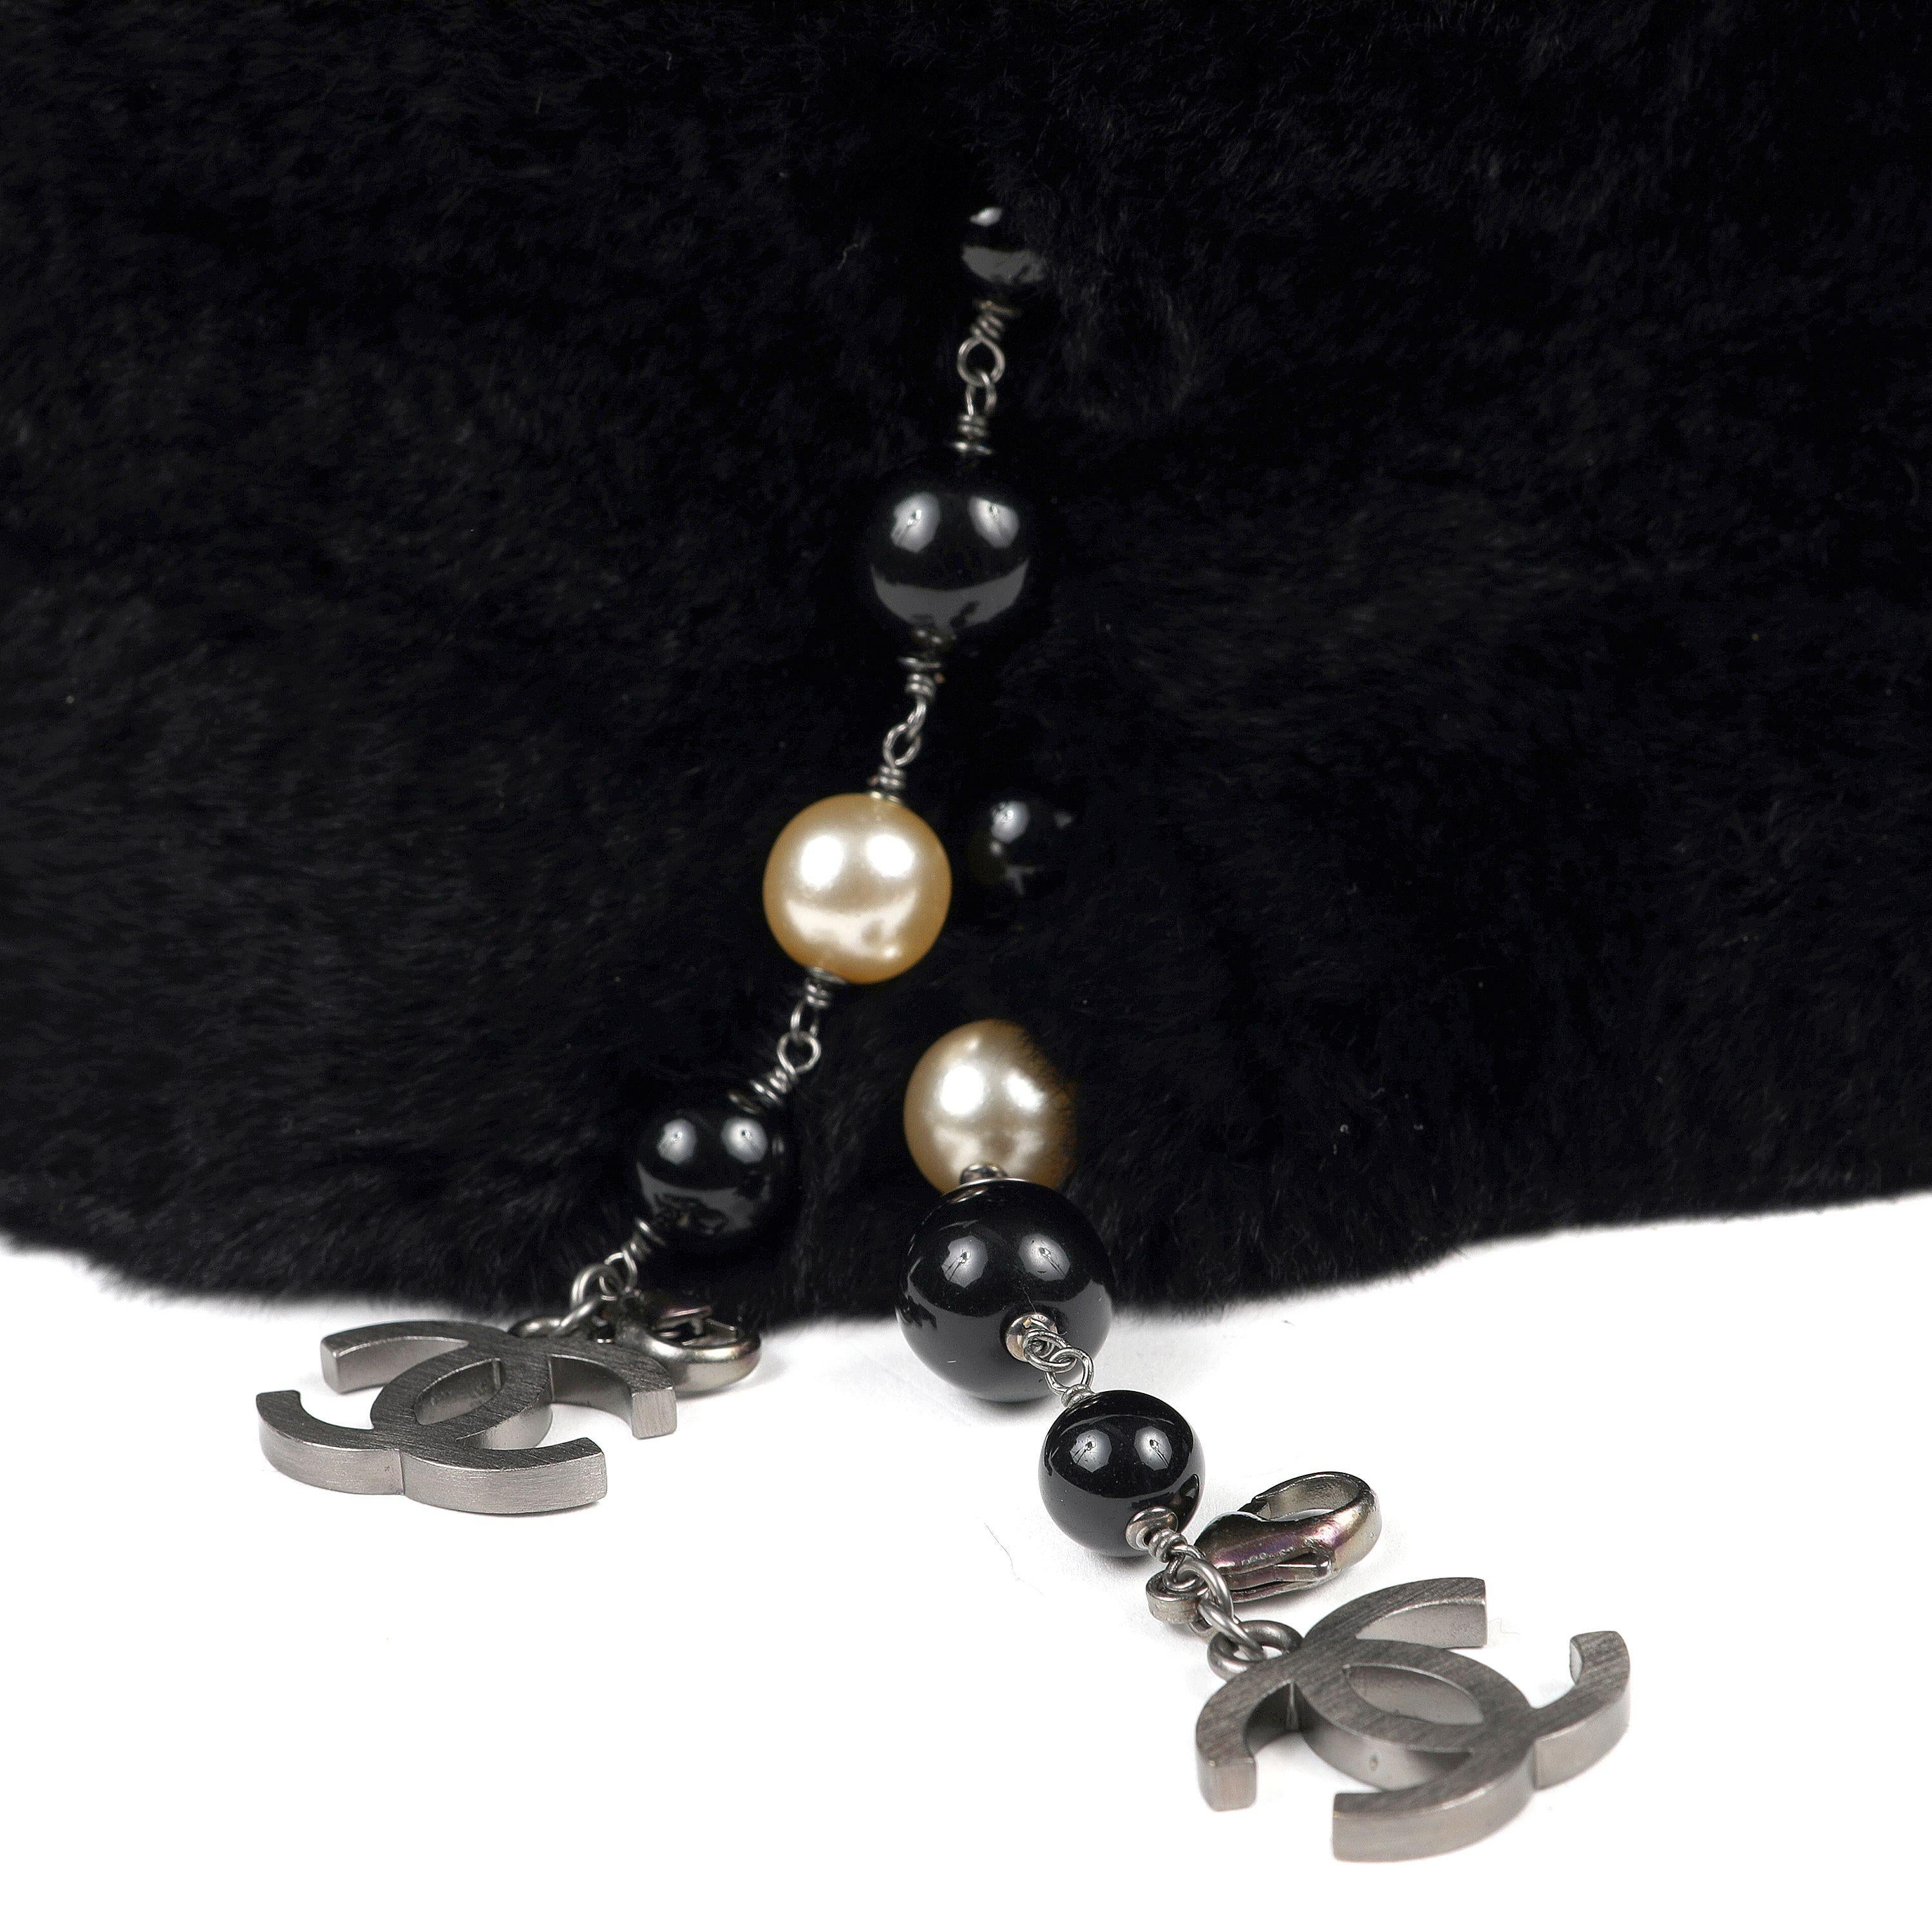 This authentic Chanel Black Rabbit Fur Collar is pristine.  Soft and luxurious black rabbit fur neck collar is embellished with faux pearls strands and CC’s. 

ACO 13757

